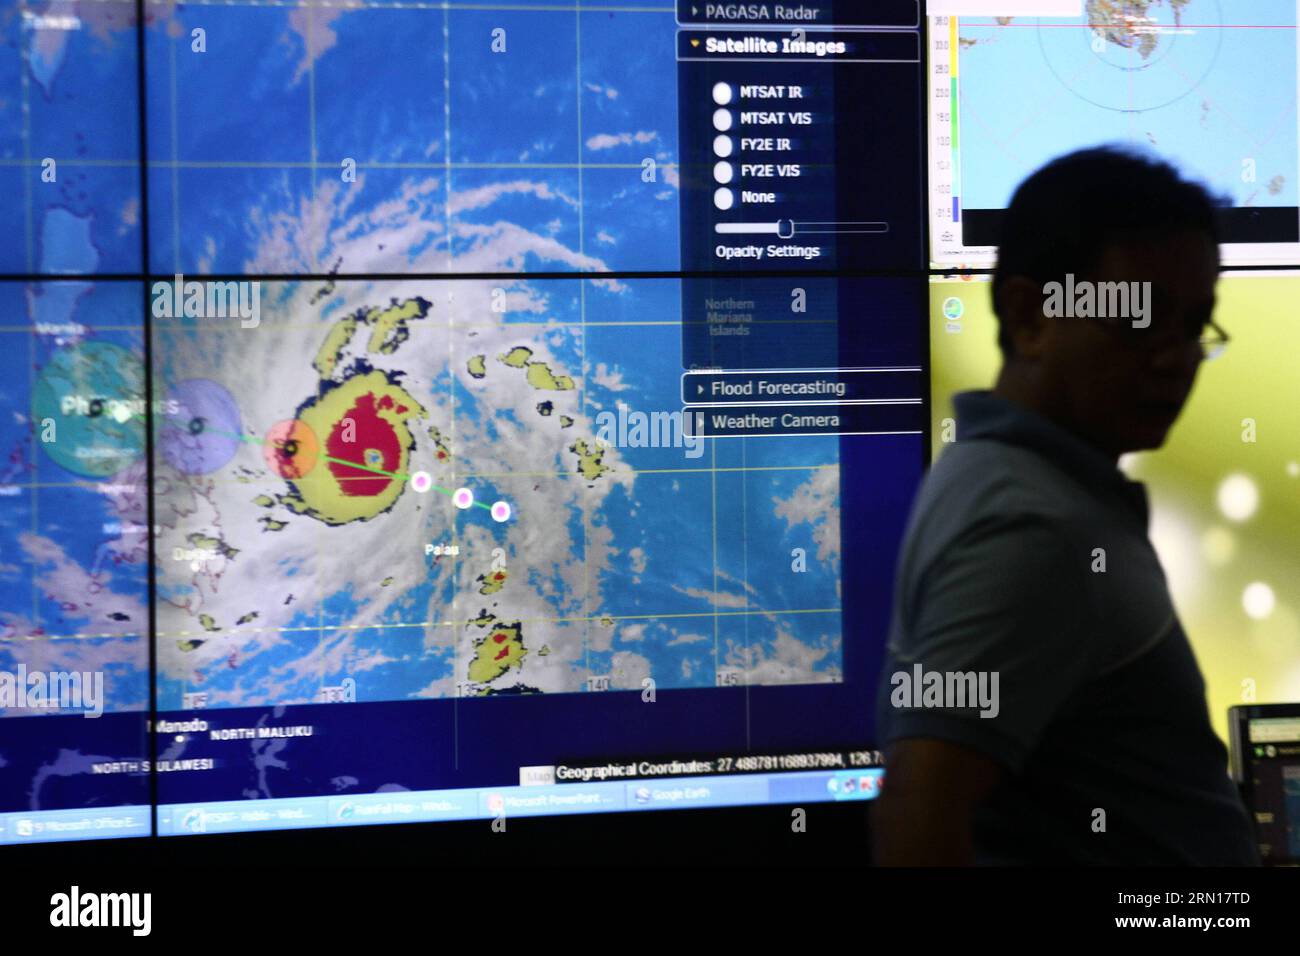 (141204) -- QUEZON CITY, Dec. 4, 2014 -- A meteorologist monitors the path of typhoon Hagupit at the Philippine Atmospheric, Geophysical and Astronomical Services Administration (PAGASA) headquarters in Quezon City, the Philippines, on Dec. 4, 2014. Typhoon Hagupit is packing maximum winds of 205 kph near the center and gustiness of up to 240 kph. The Philippine government will implement forced evacuation in areas that are expected to be hit by typhoon Hagupit (local name Ruby ), a senior government official said Thursday. ) PHILIPPINES-QUEZON CITY-TYPHOON-HAGUPIT RouellexUmali PUBLICATIONxNOT Stock Photo